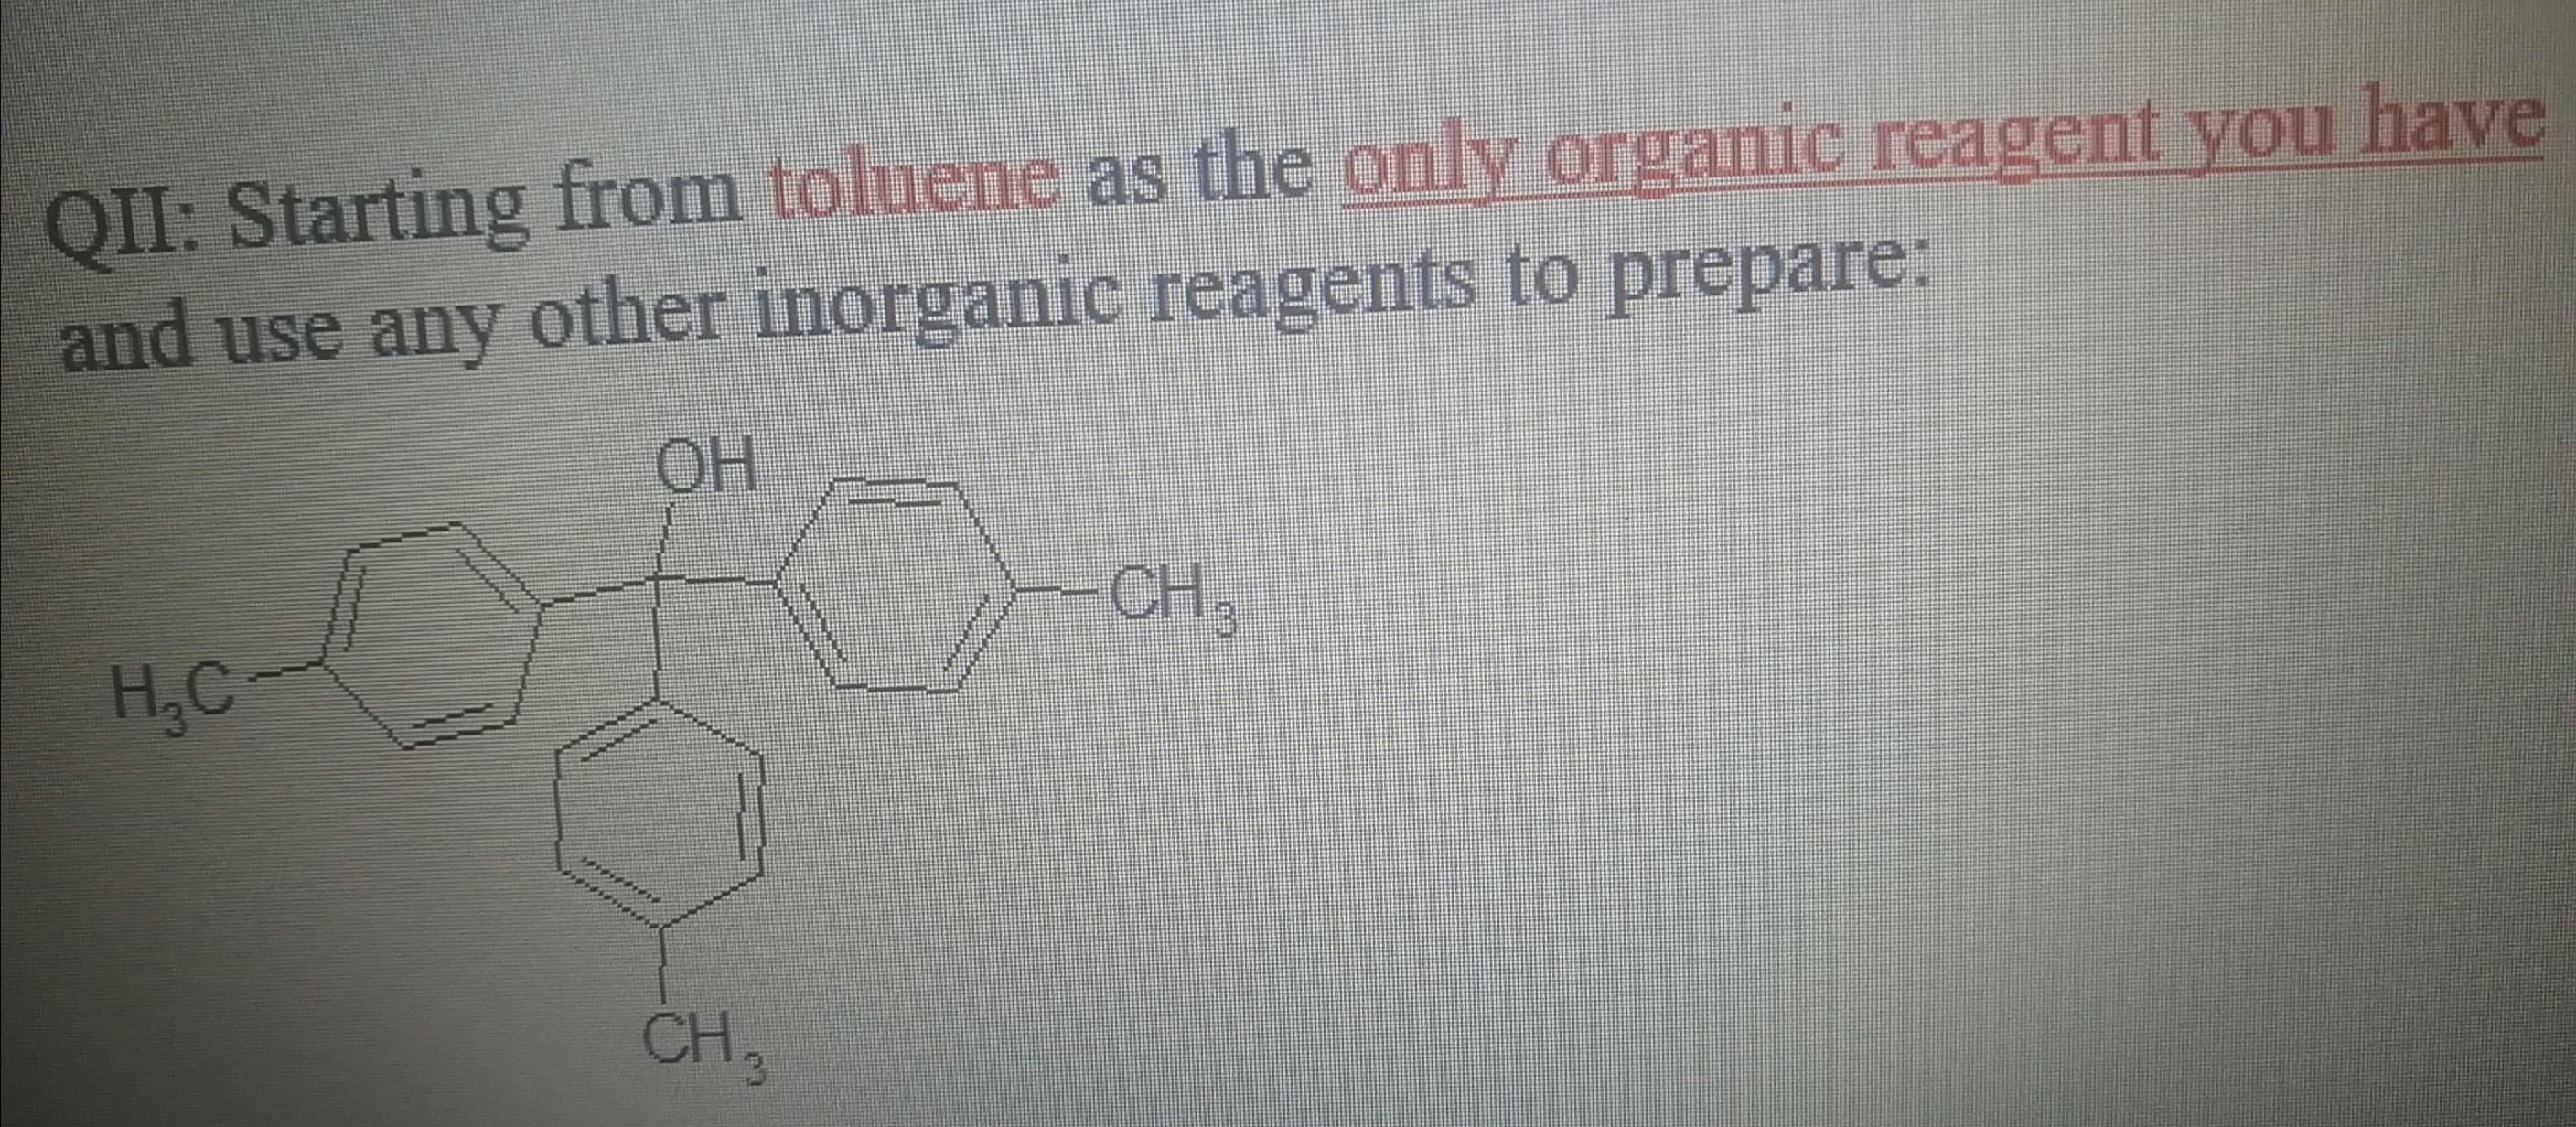 QII: Starting from toluene as the only organic reagent you have
and use any other inorganic reagents to prepare:
ОН
-CH
НС
CH,
